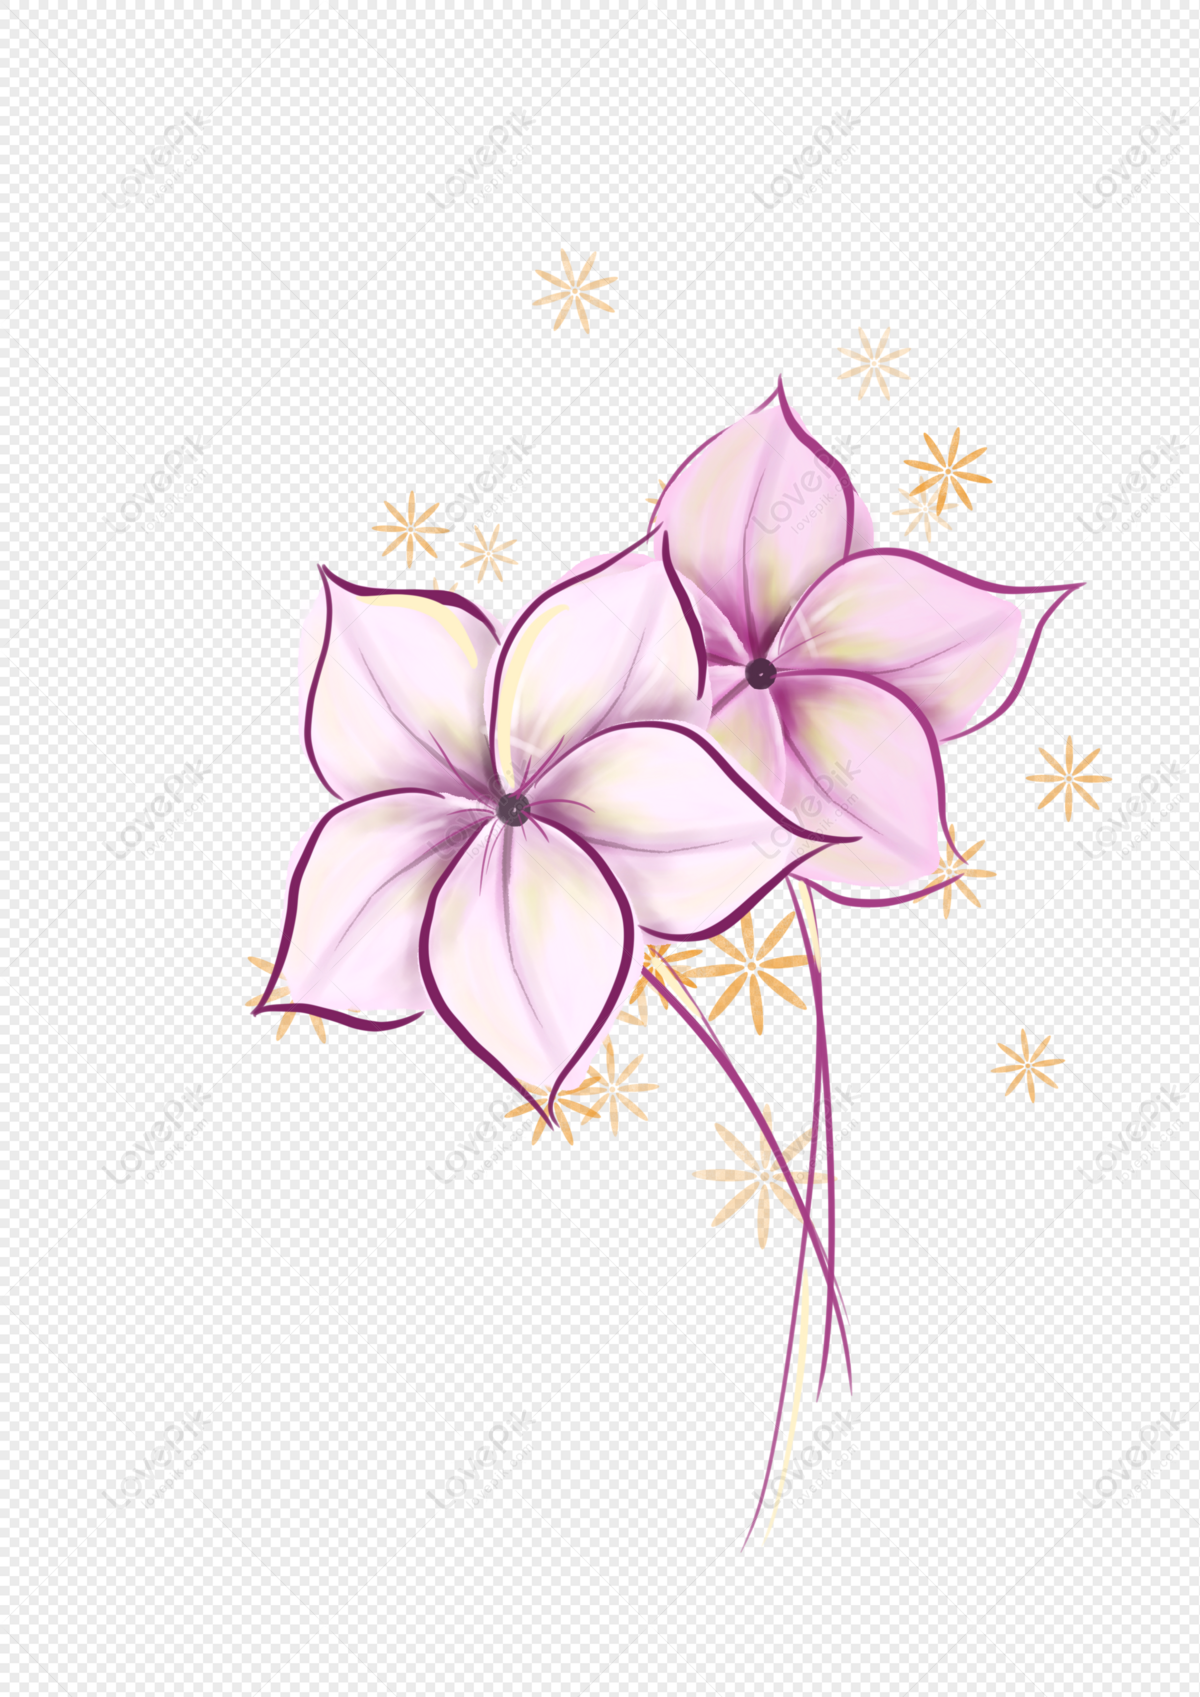 Periwinkle Flower Images | Free Photos, PNG Stickers, Wallpapers &  Backgrounds - rawpixel